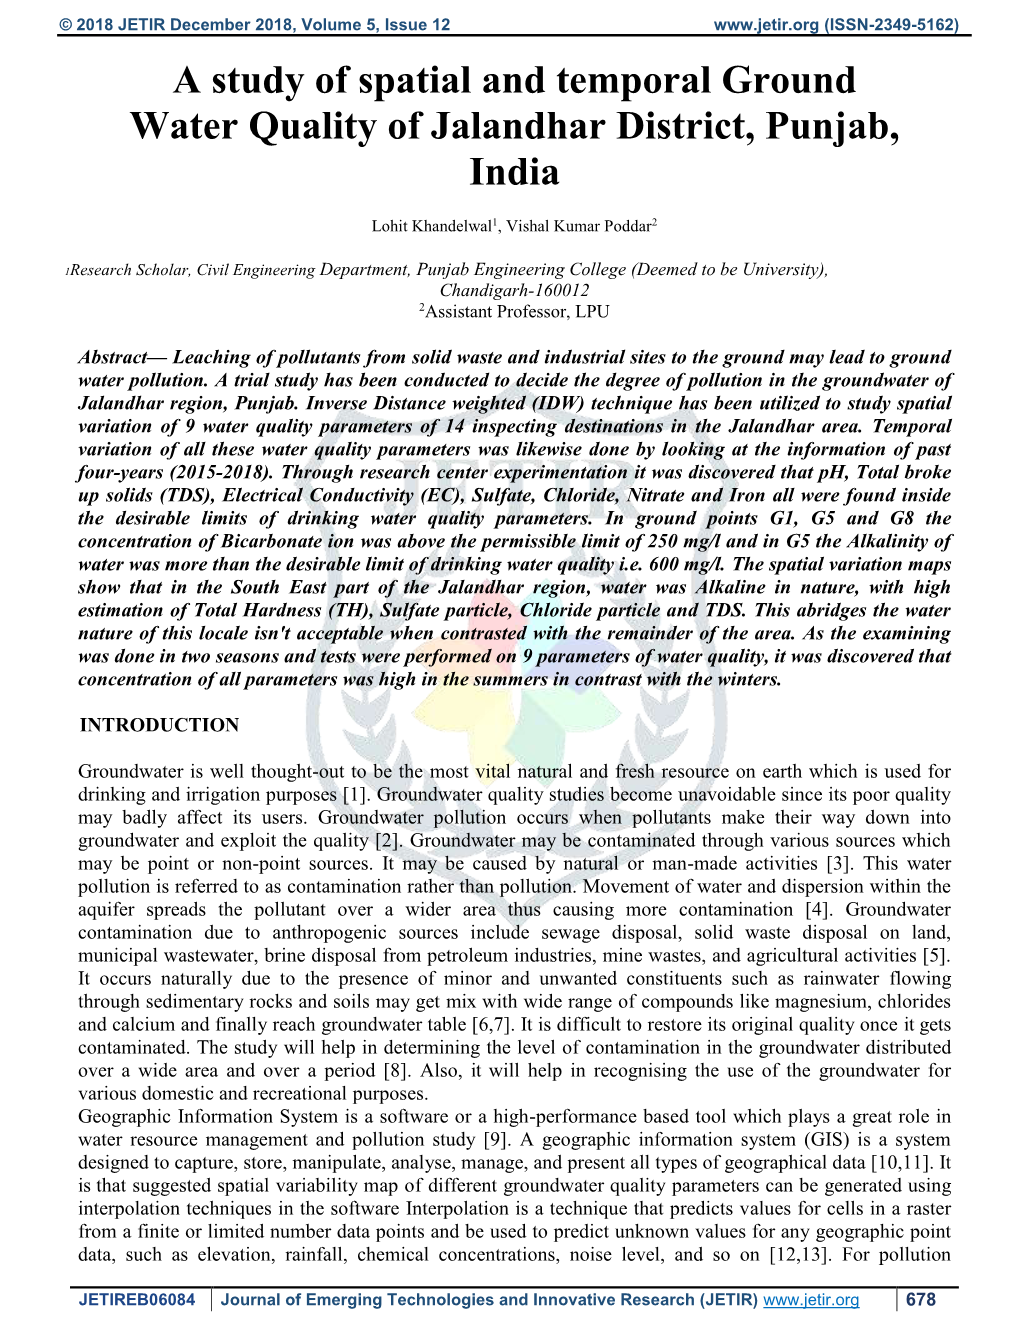 A Study of Spatial and Temporal Ground Water Quality of Jalandhar District, Punjab, India